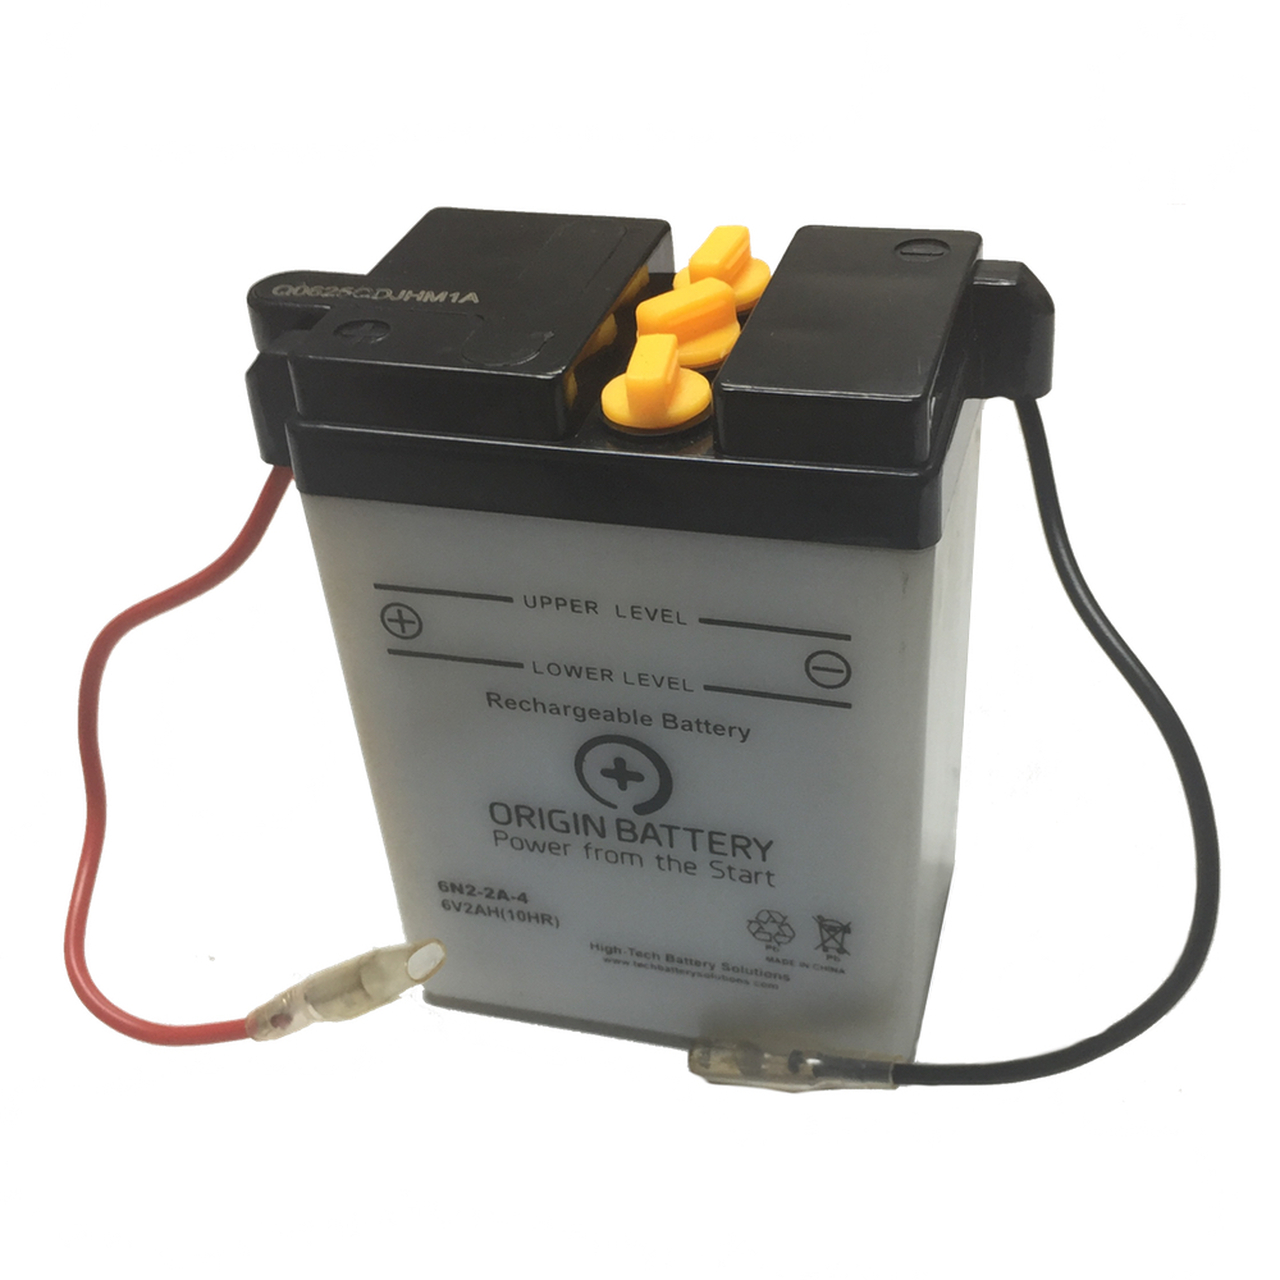 Suzuki FA50 Shuttle Battery Replacement (1980-1991) Questions & Answers